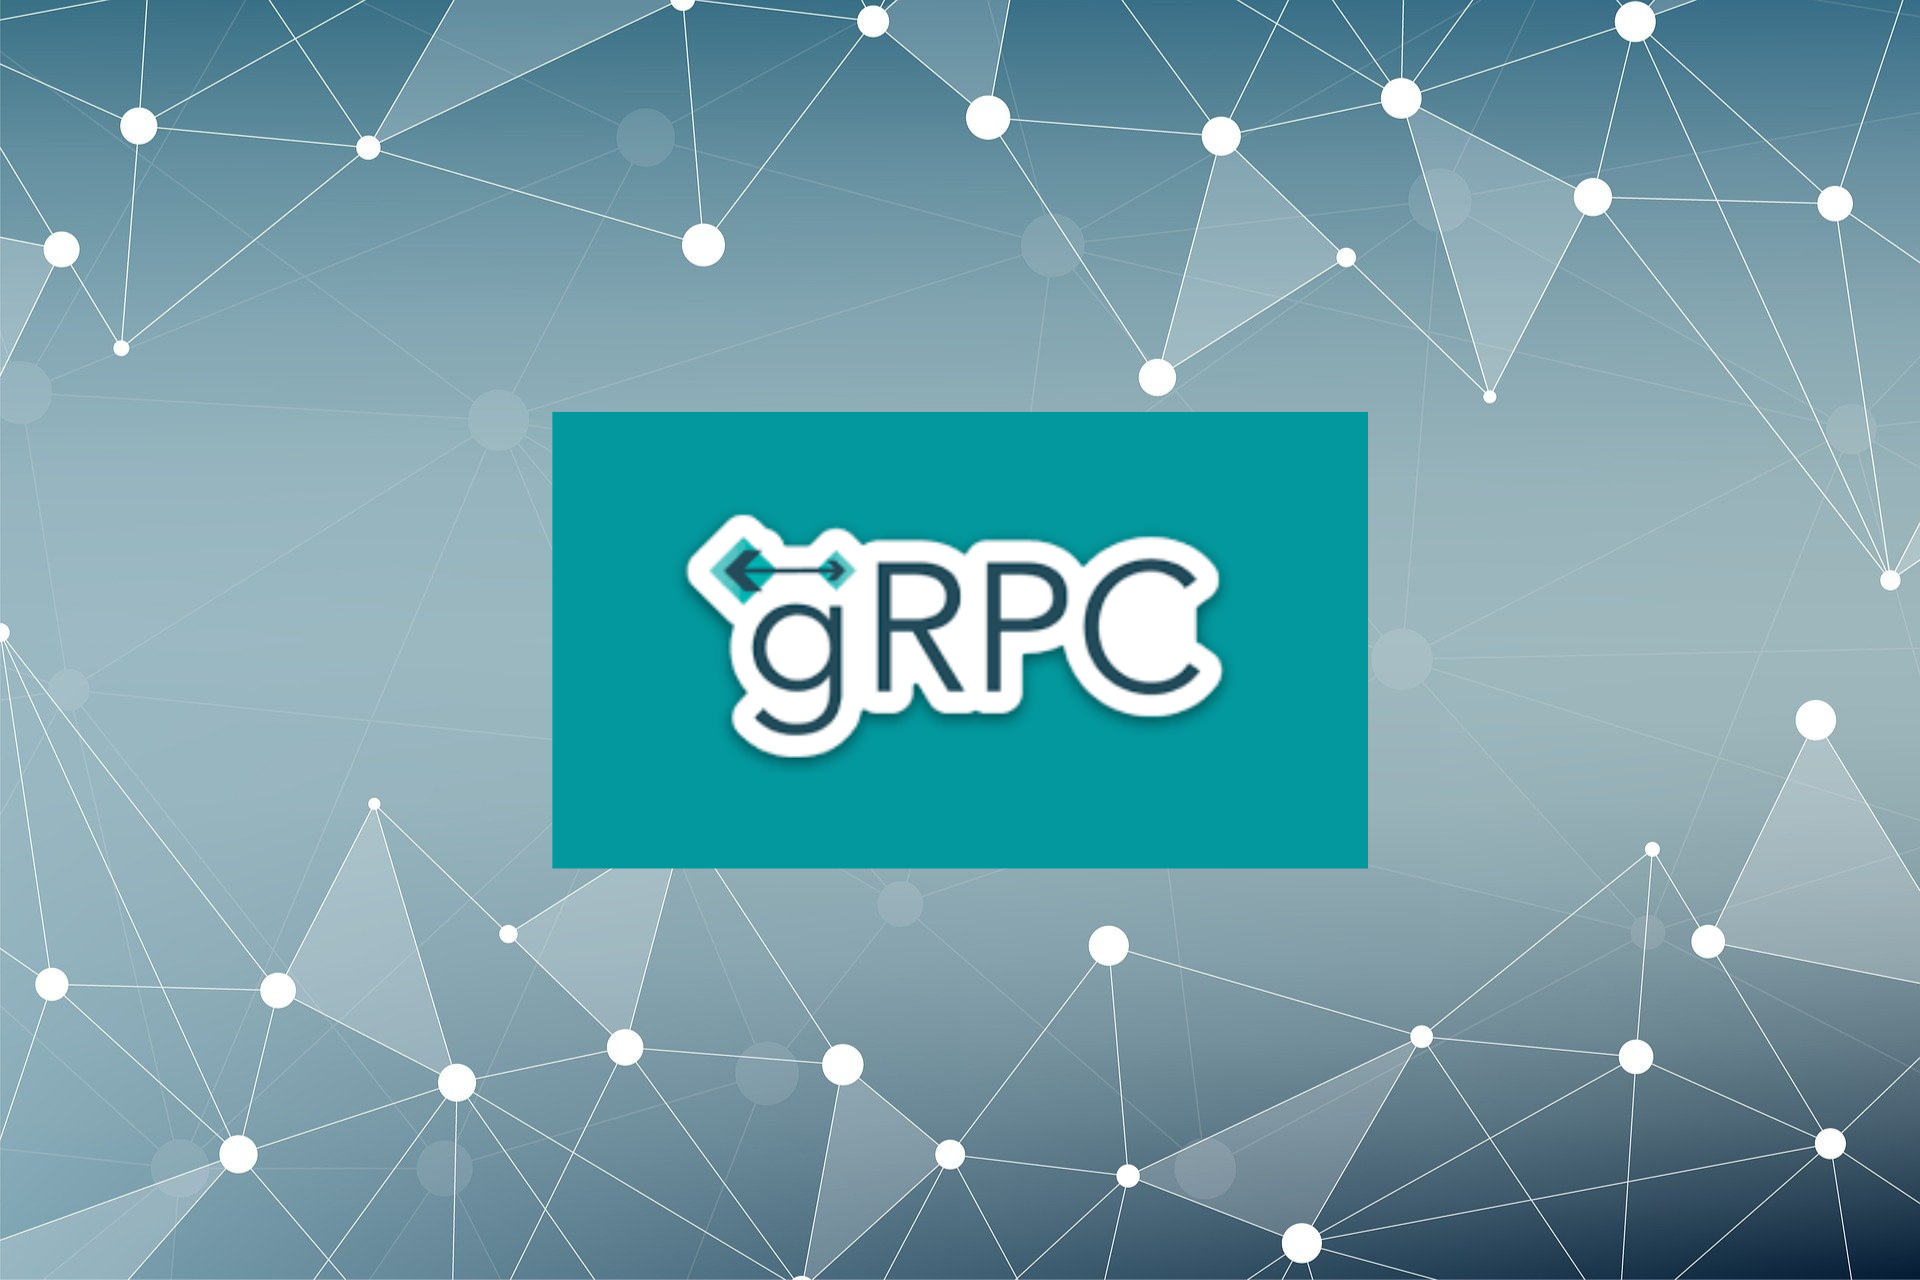 The importance of gRPC in scaling Microservices